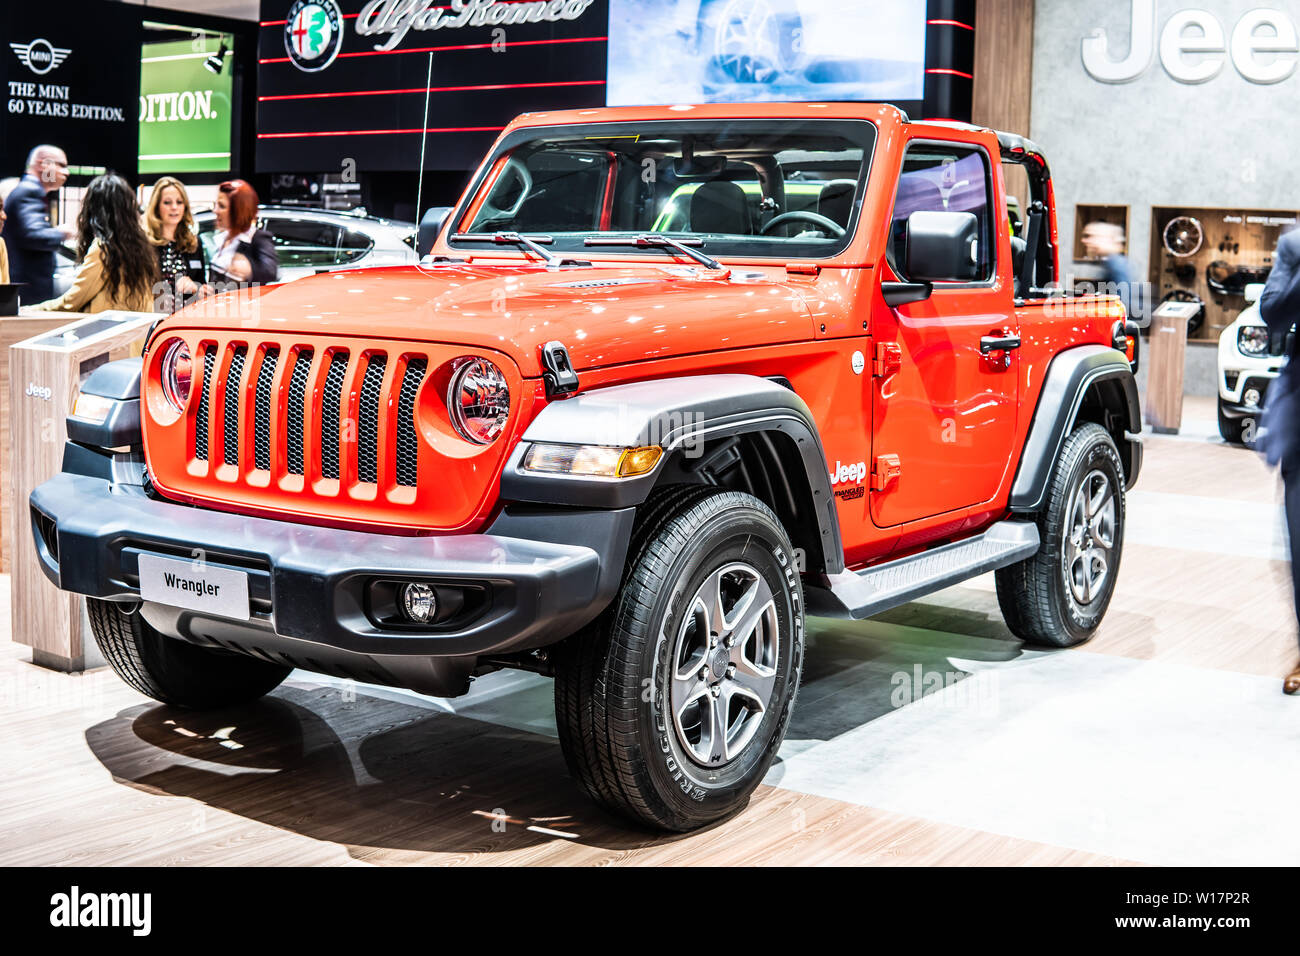 Brussels, Belgium, Jan 2019 metallic red Jeep Wrangler at Brussels Motor  Show, 4th gen, JL four-wheel drive off-road vehicle manufactured by Jeep  Stock Photo - Alamy